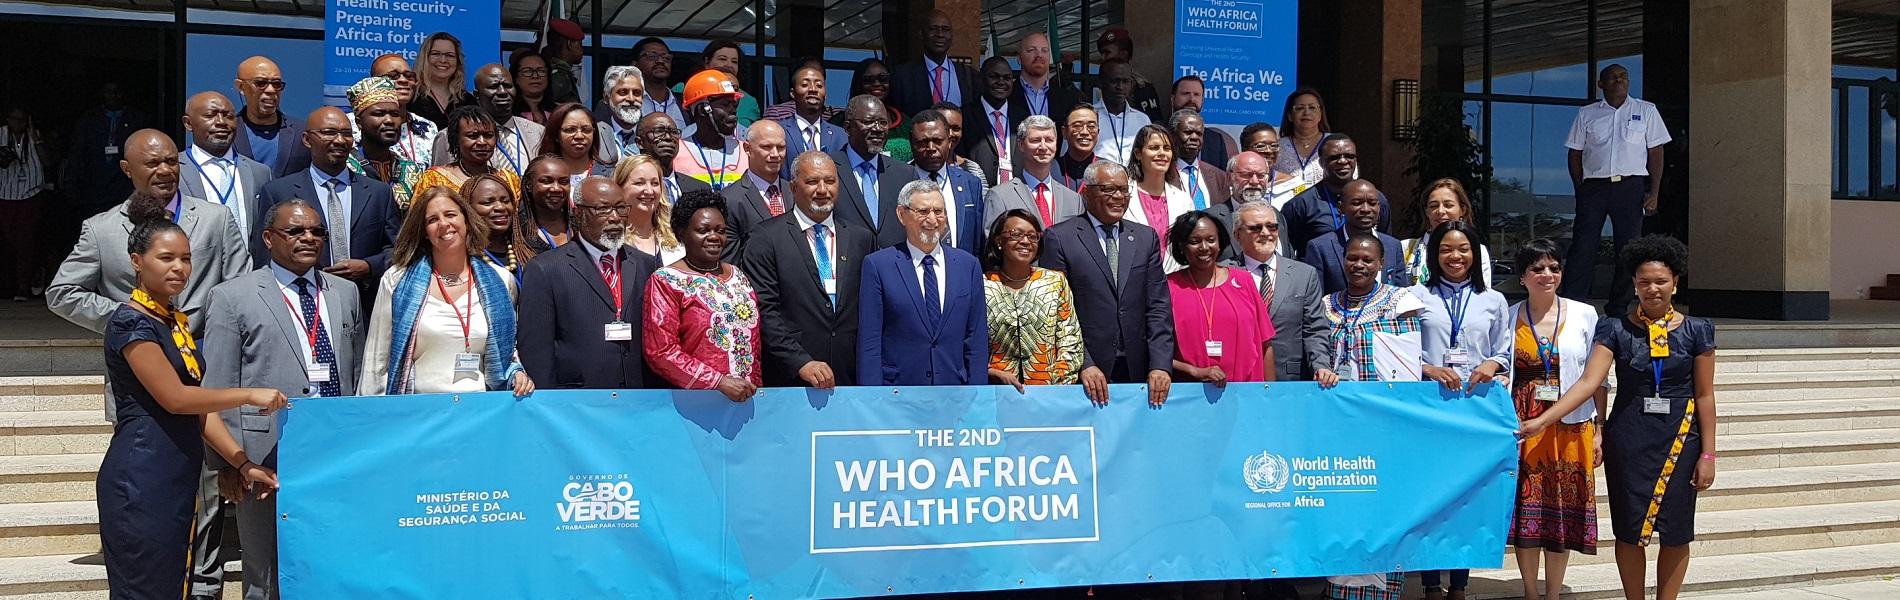 WHO AFRICA FORUM